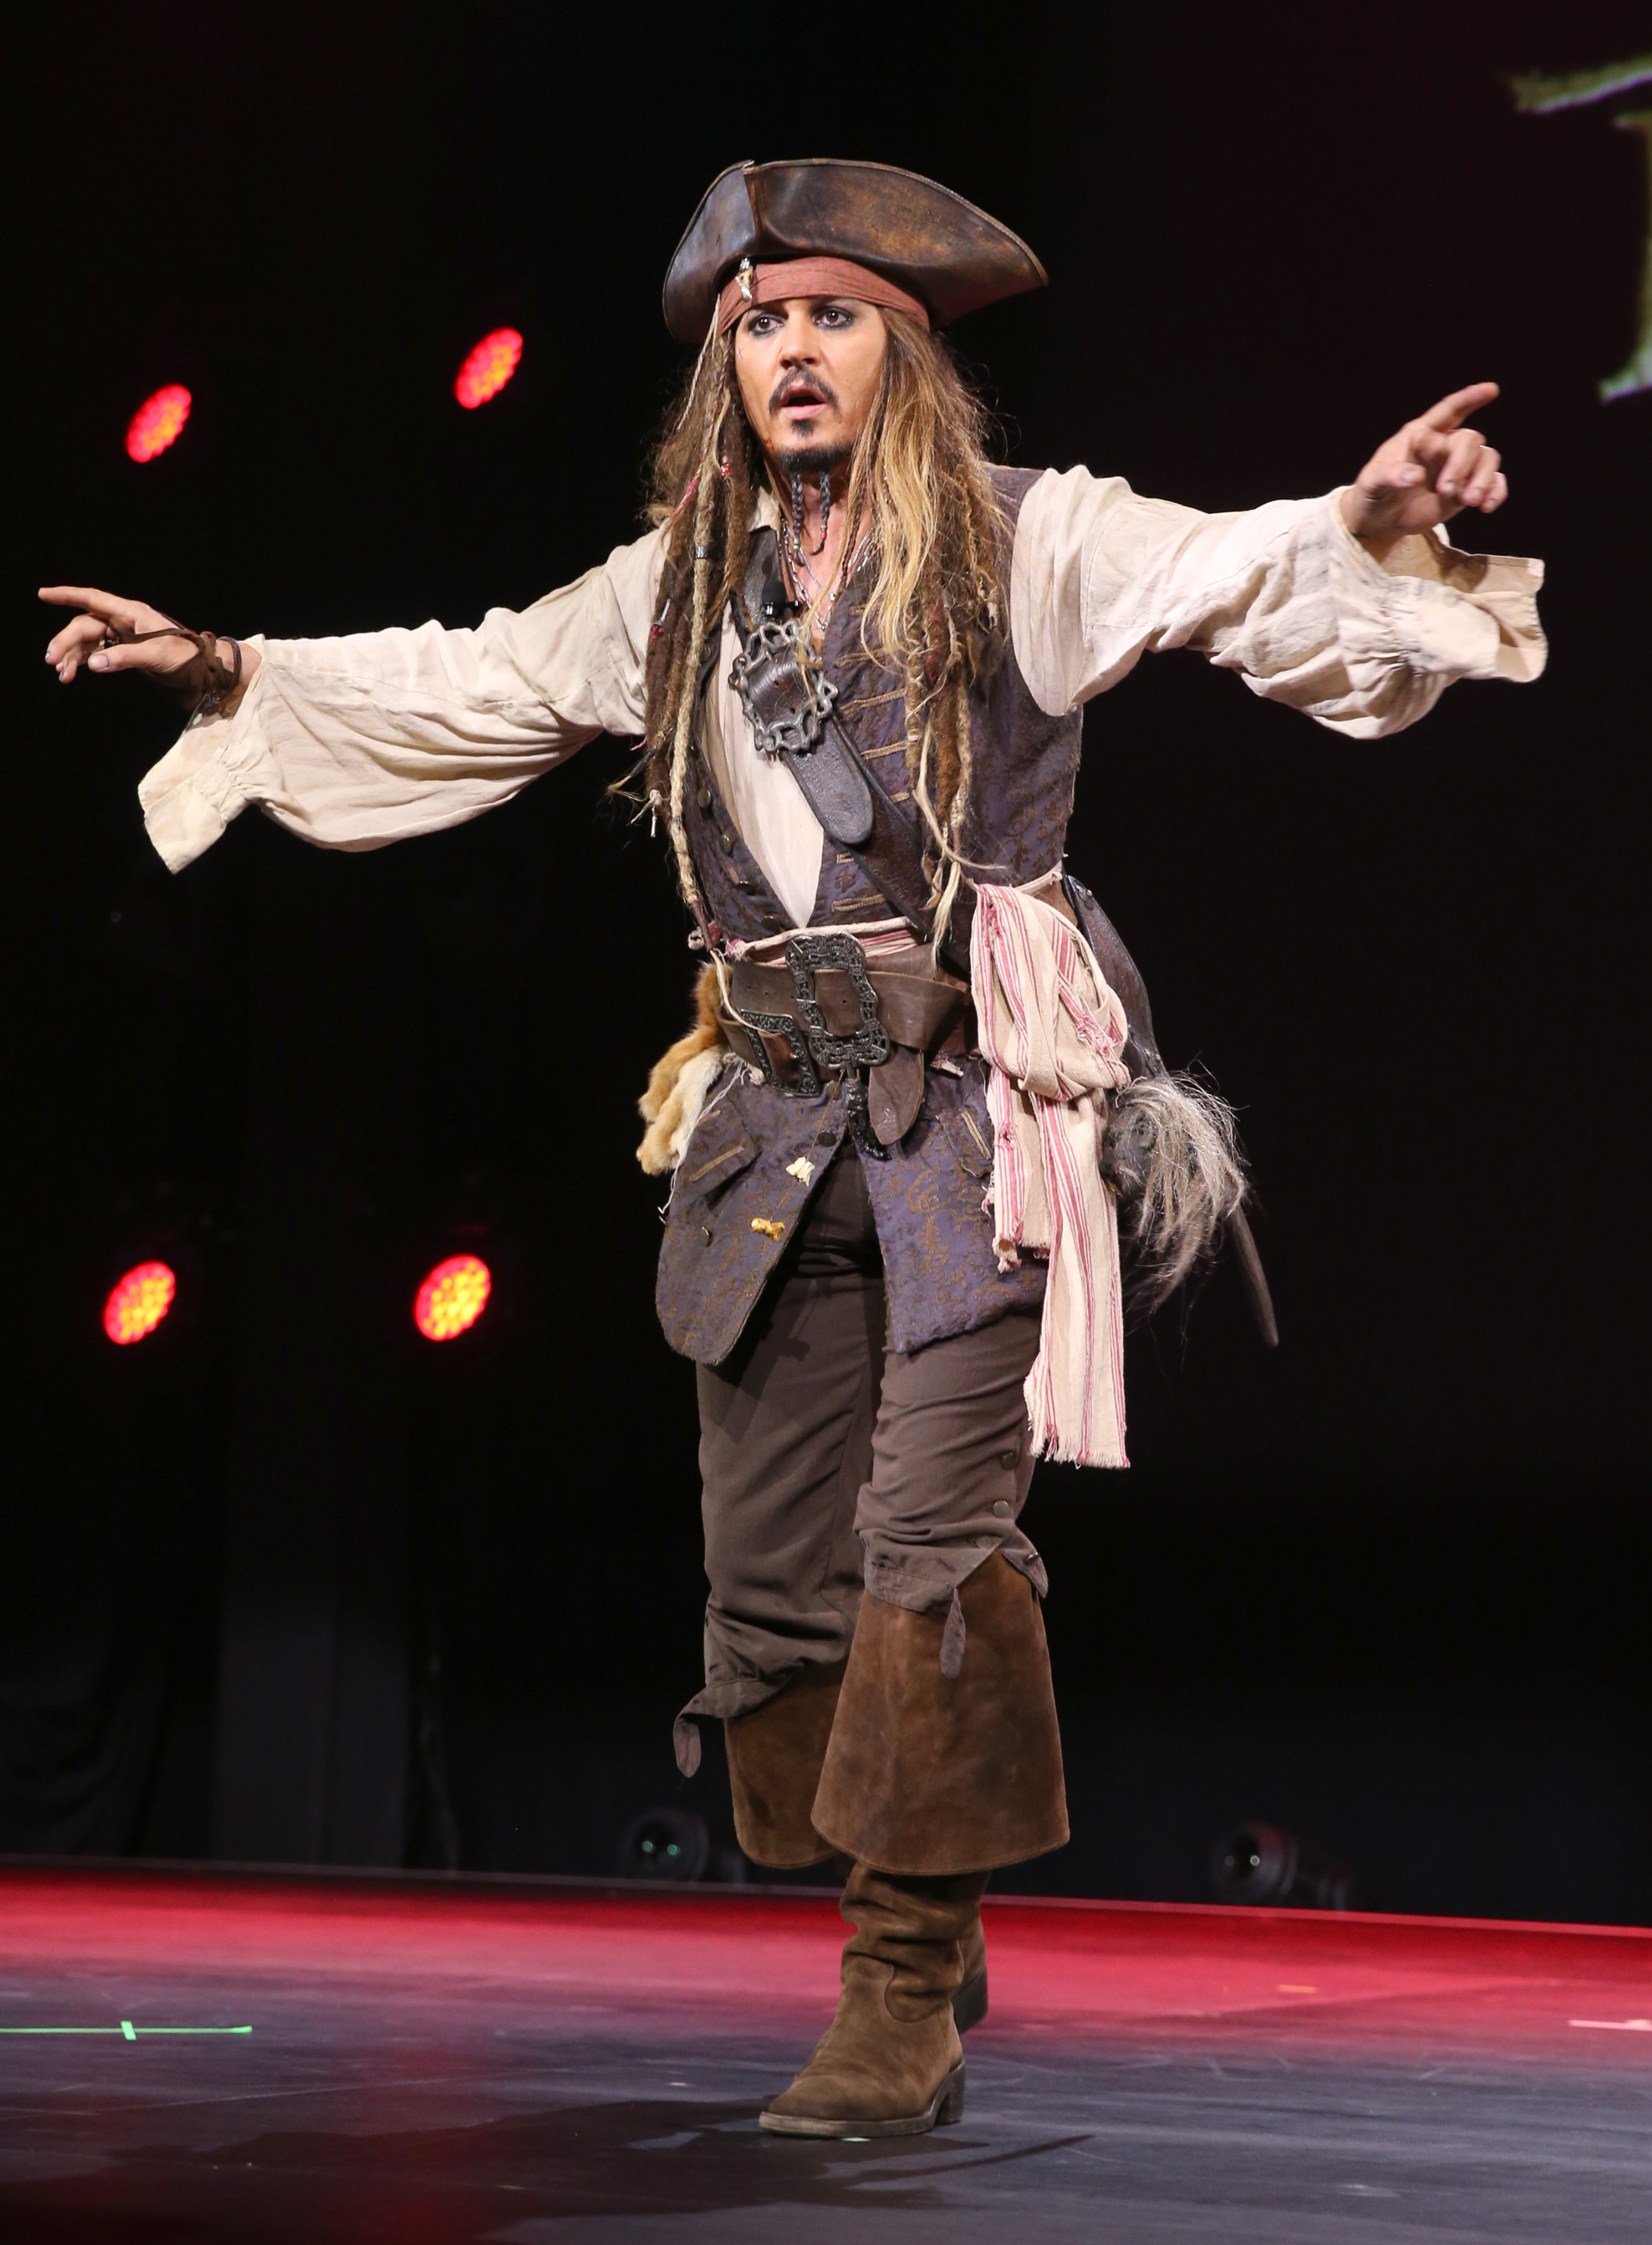 ANAHEIM, CA - AUGUST 15: Actor Johnny Depp, dressed as Captain Jack Sparrow, of PIRATES OF THE CARIBBEAN: DEAD MEN TELL NO TALES took part today in "Worlds, Galaxies, and Universes: Live Action at The Walt Disney Studios" presentation at Disney's D23 EXPO 2015 in Anaheim, Calif. (Photo by Jesse Grant/Getty Images for Disney)